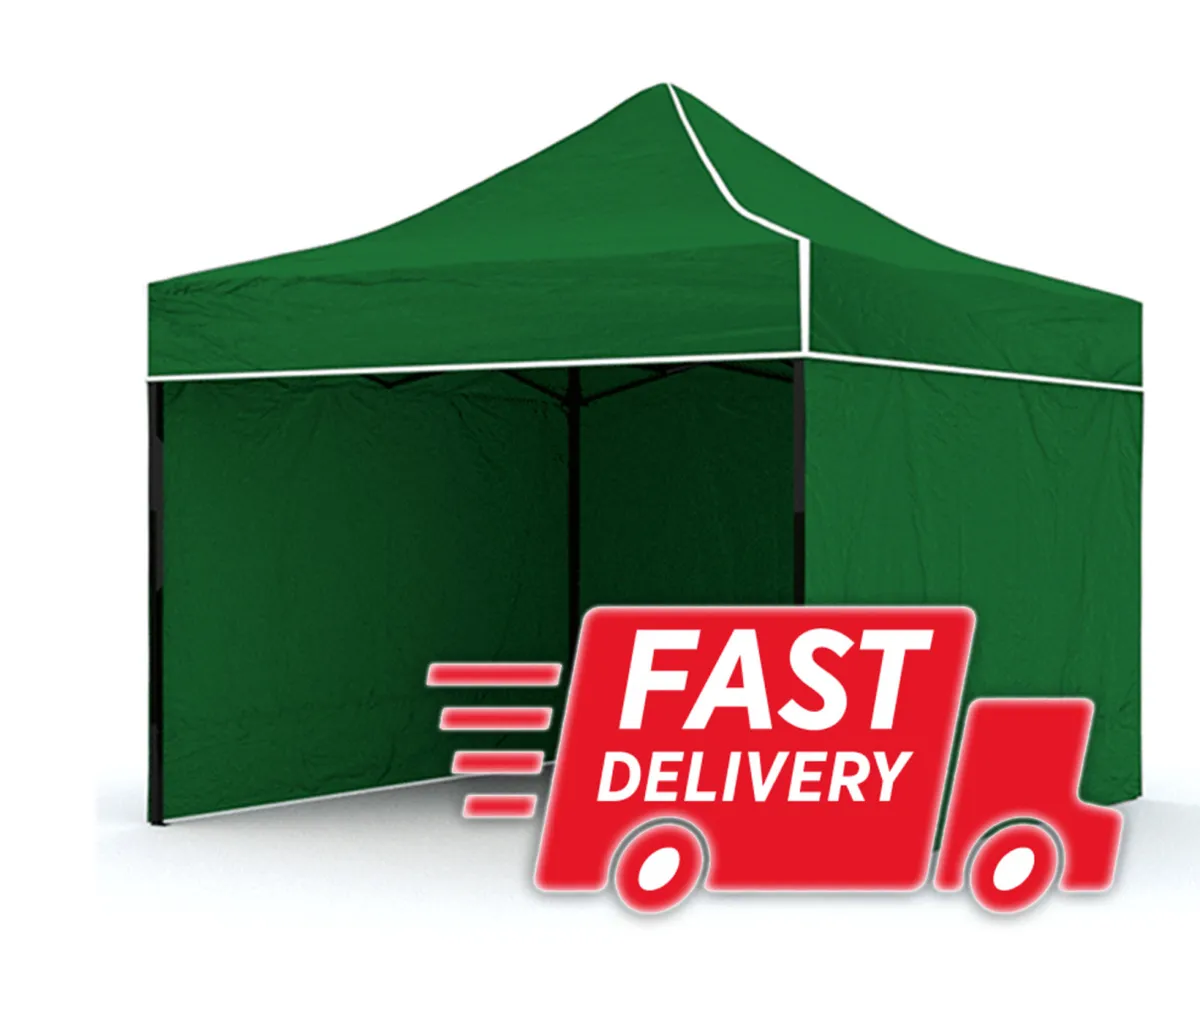 Extra Strong Commercial Grade 3x3m GAZEBO pop up - Image 1